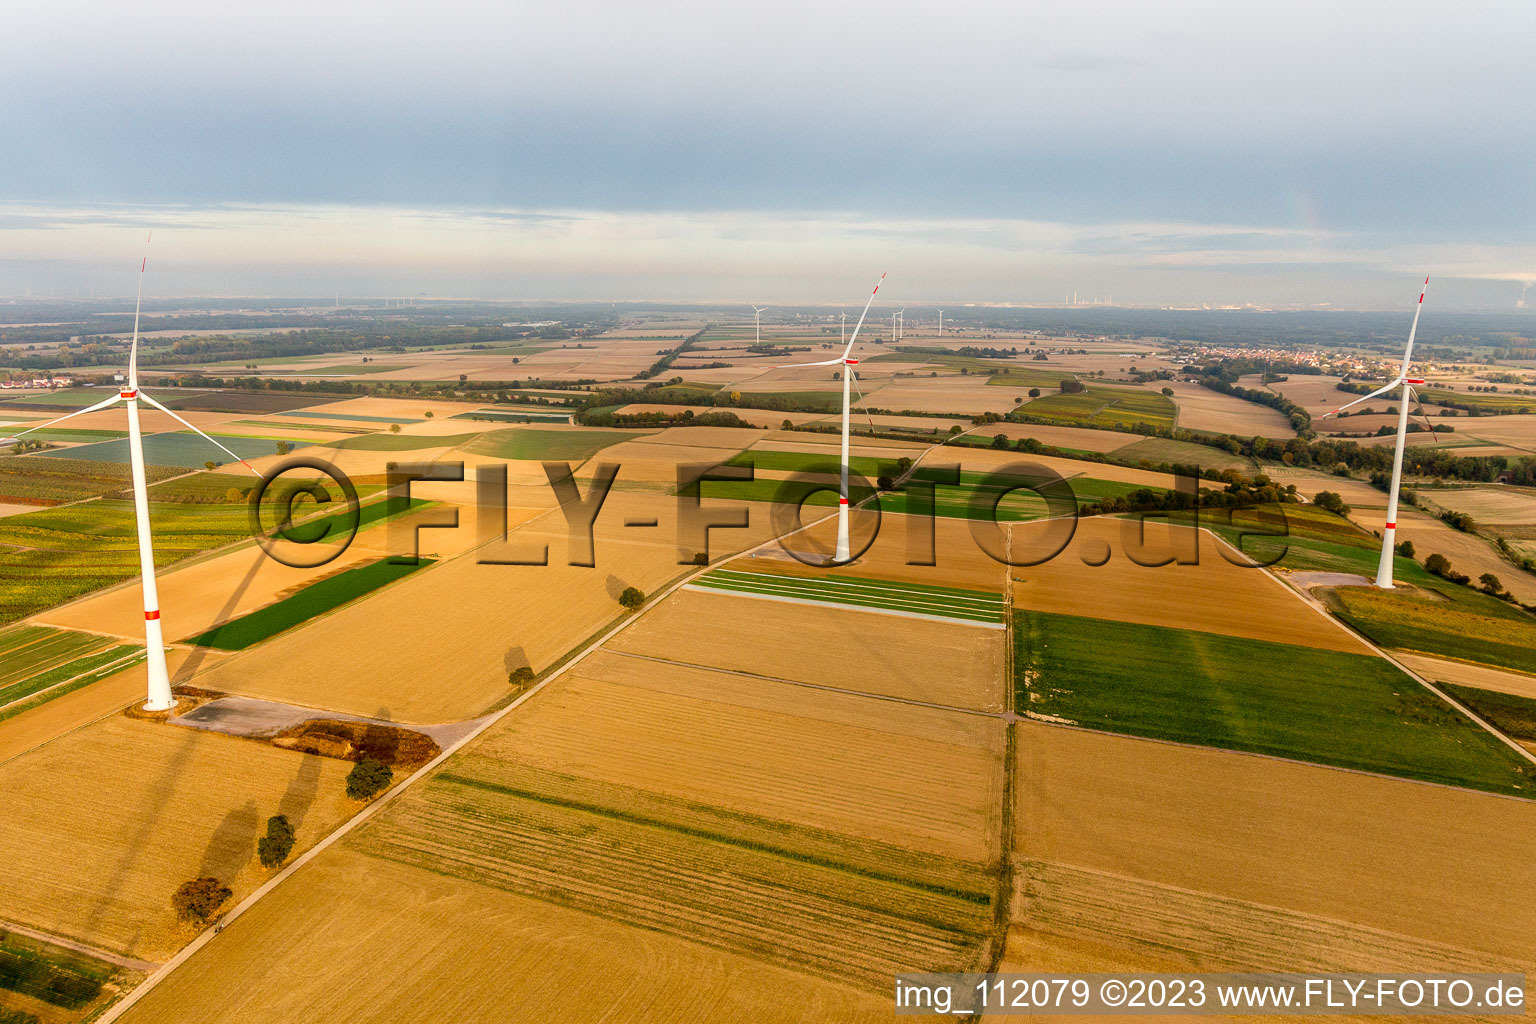 EnBW wind farm - wind turbine with 6 wind turbines in Freckenfeld in the state Rhineland-Palatinate, Germany from the drone perspective